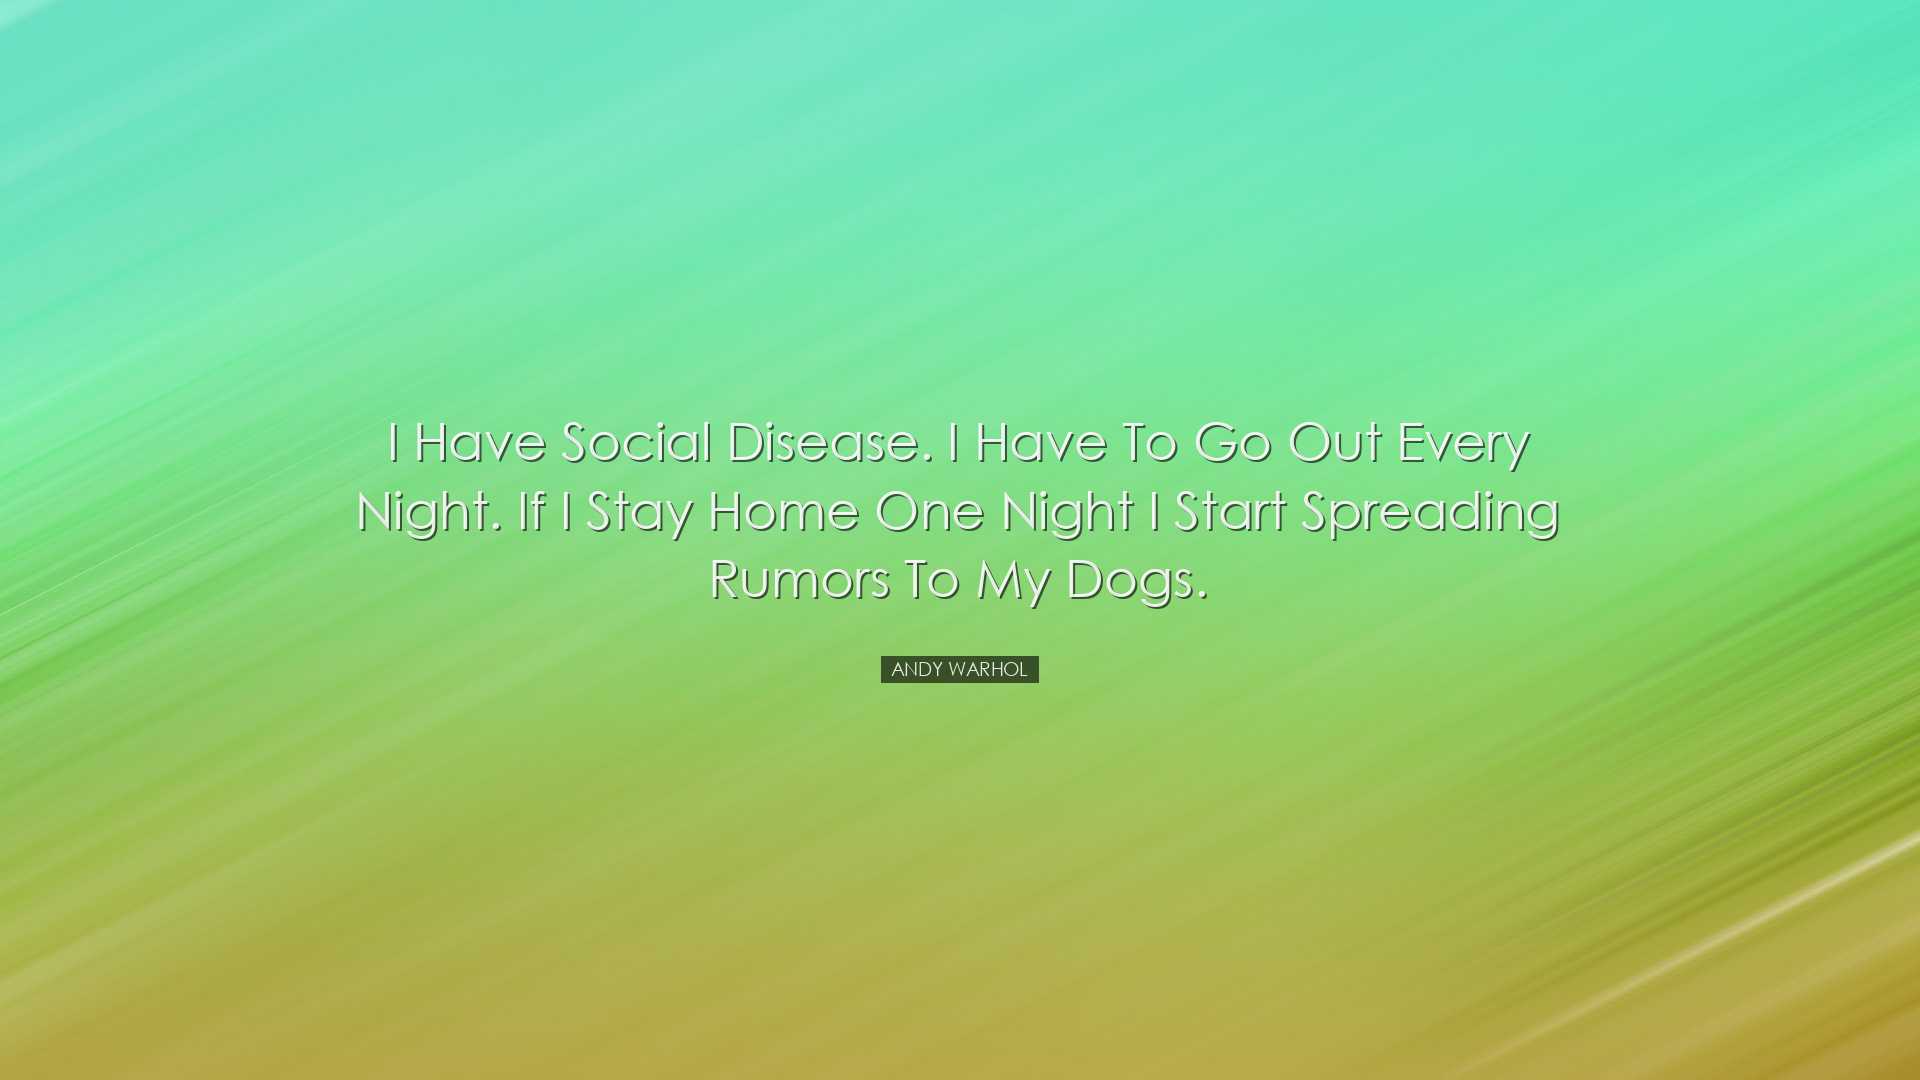 I have Social Disease. I have to go out every night. If I stay hom